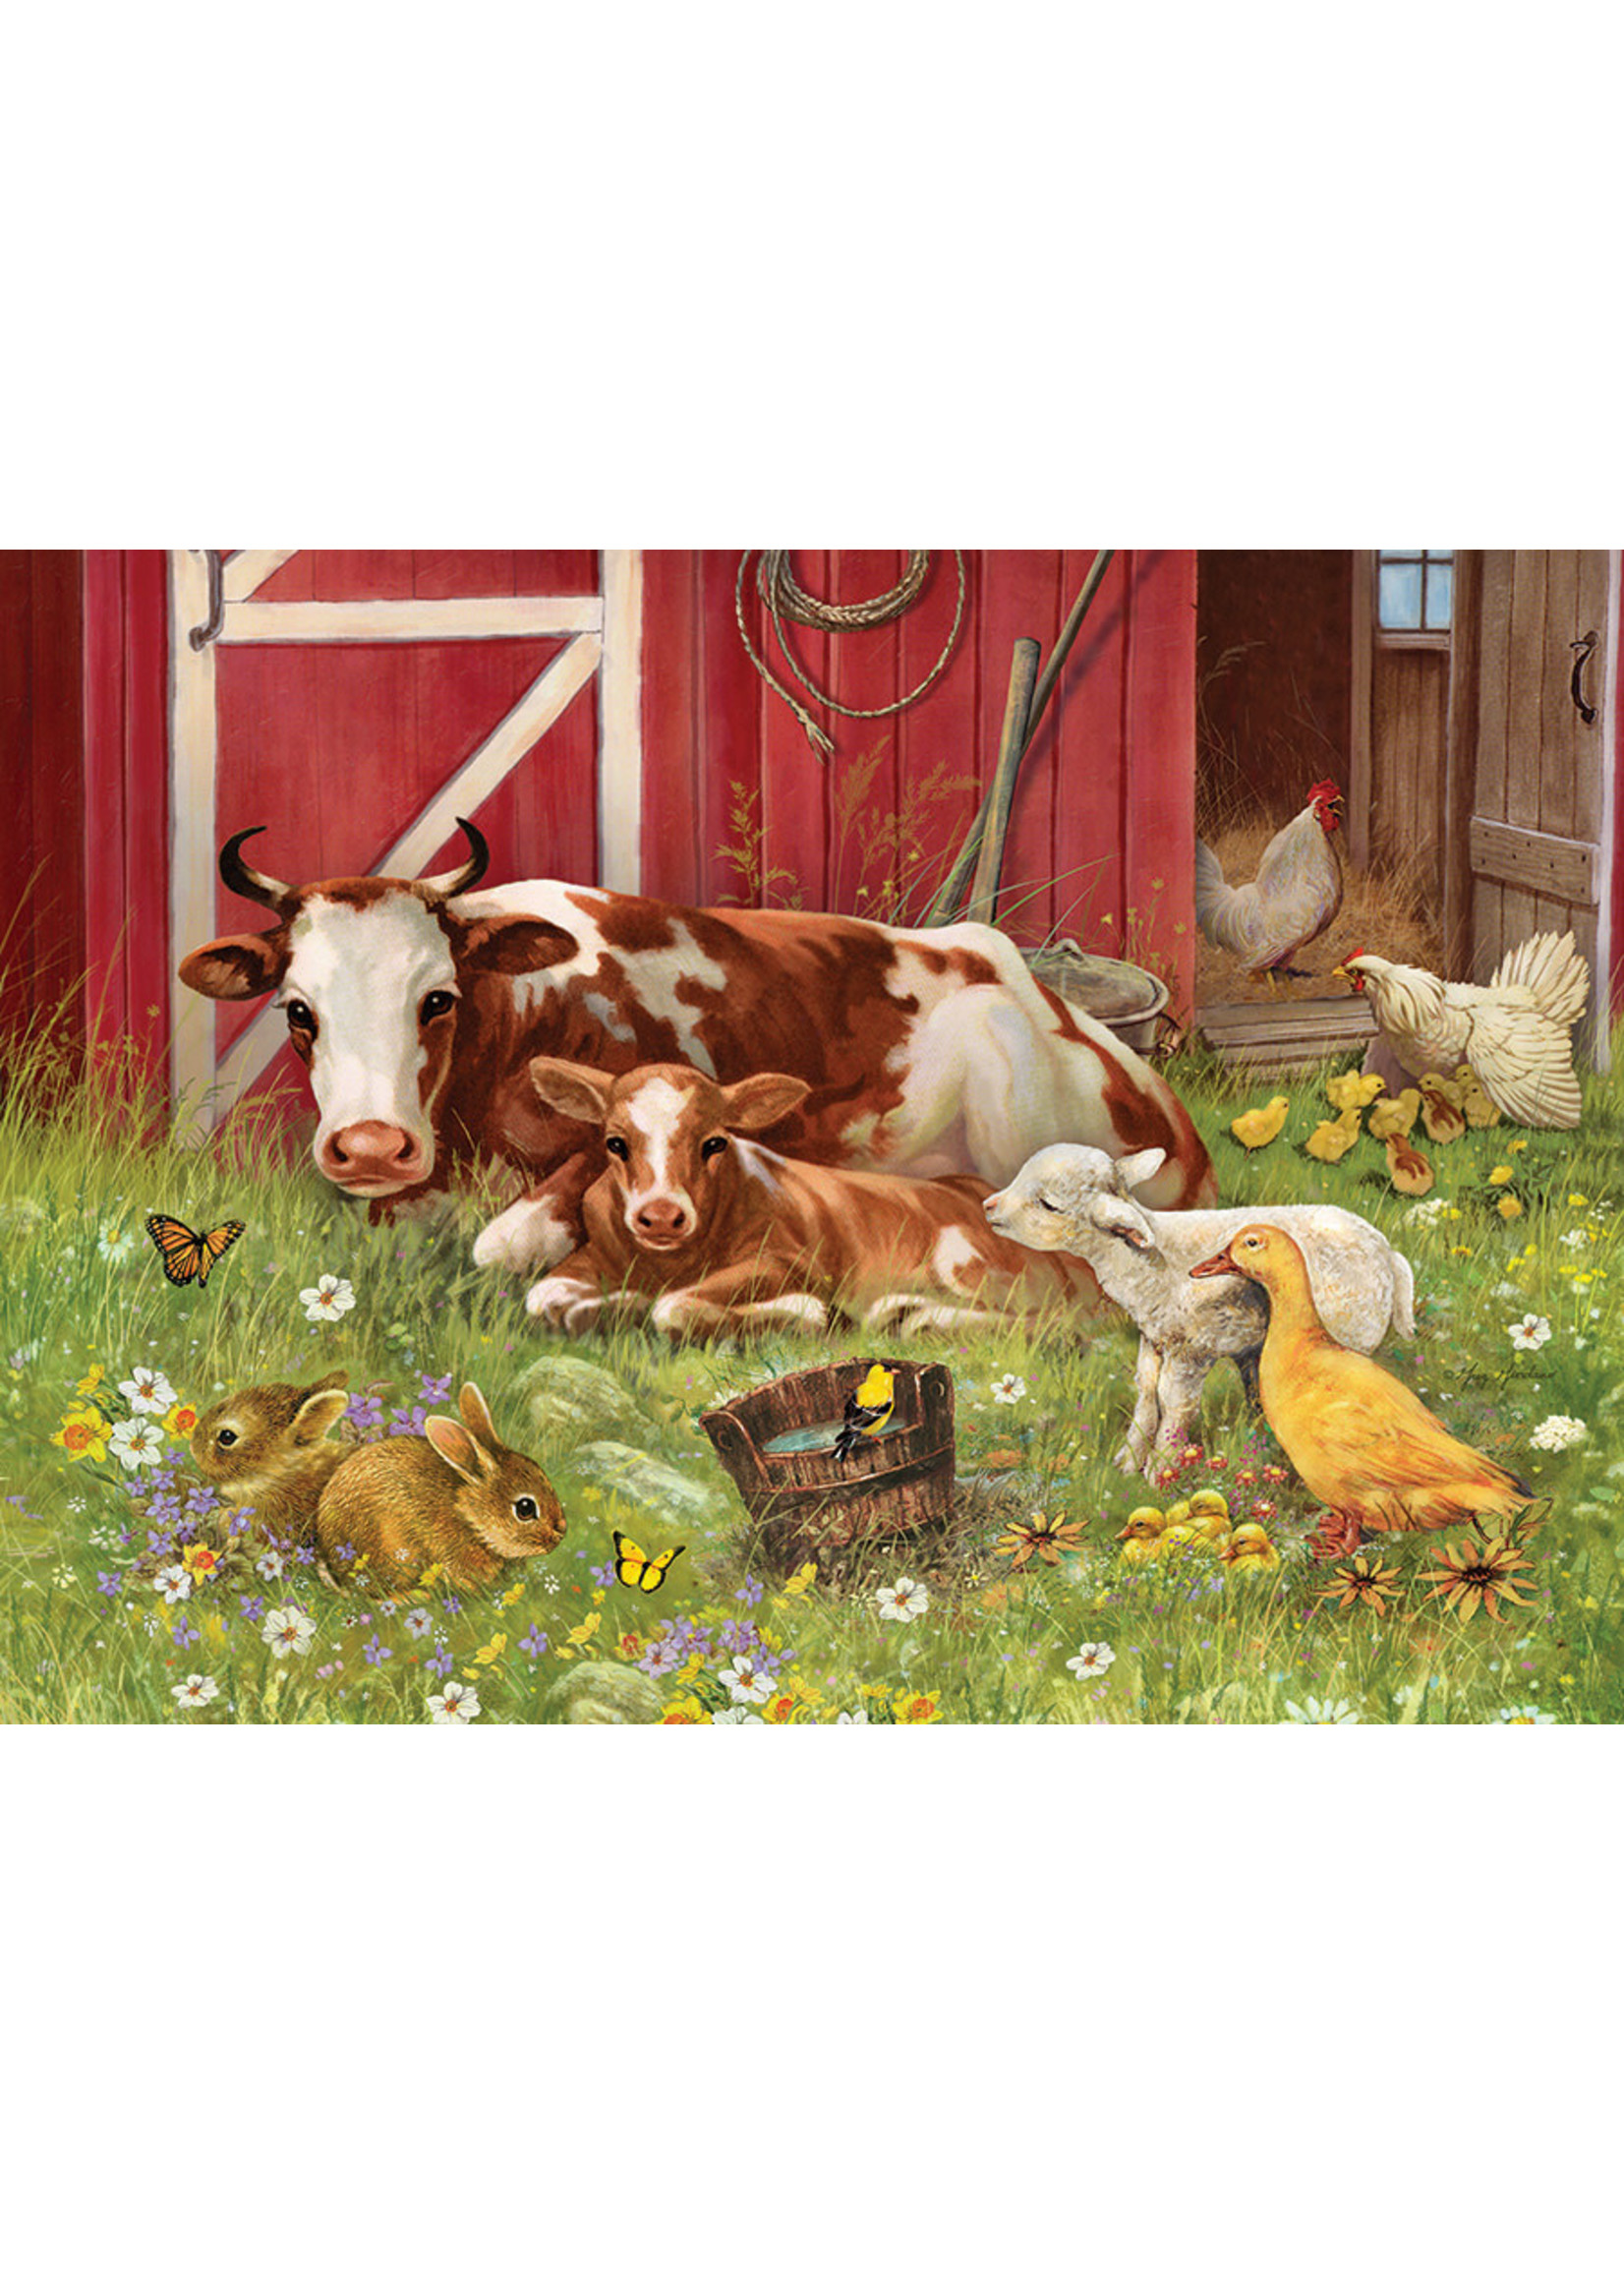 Cobble Hill Barnyard Babies Family Puzzle 350 Pieces